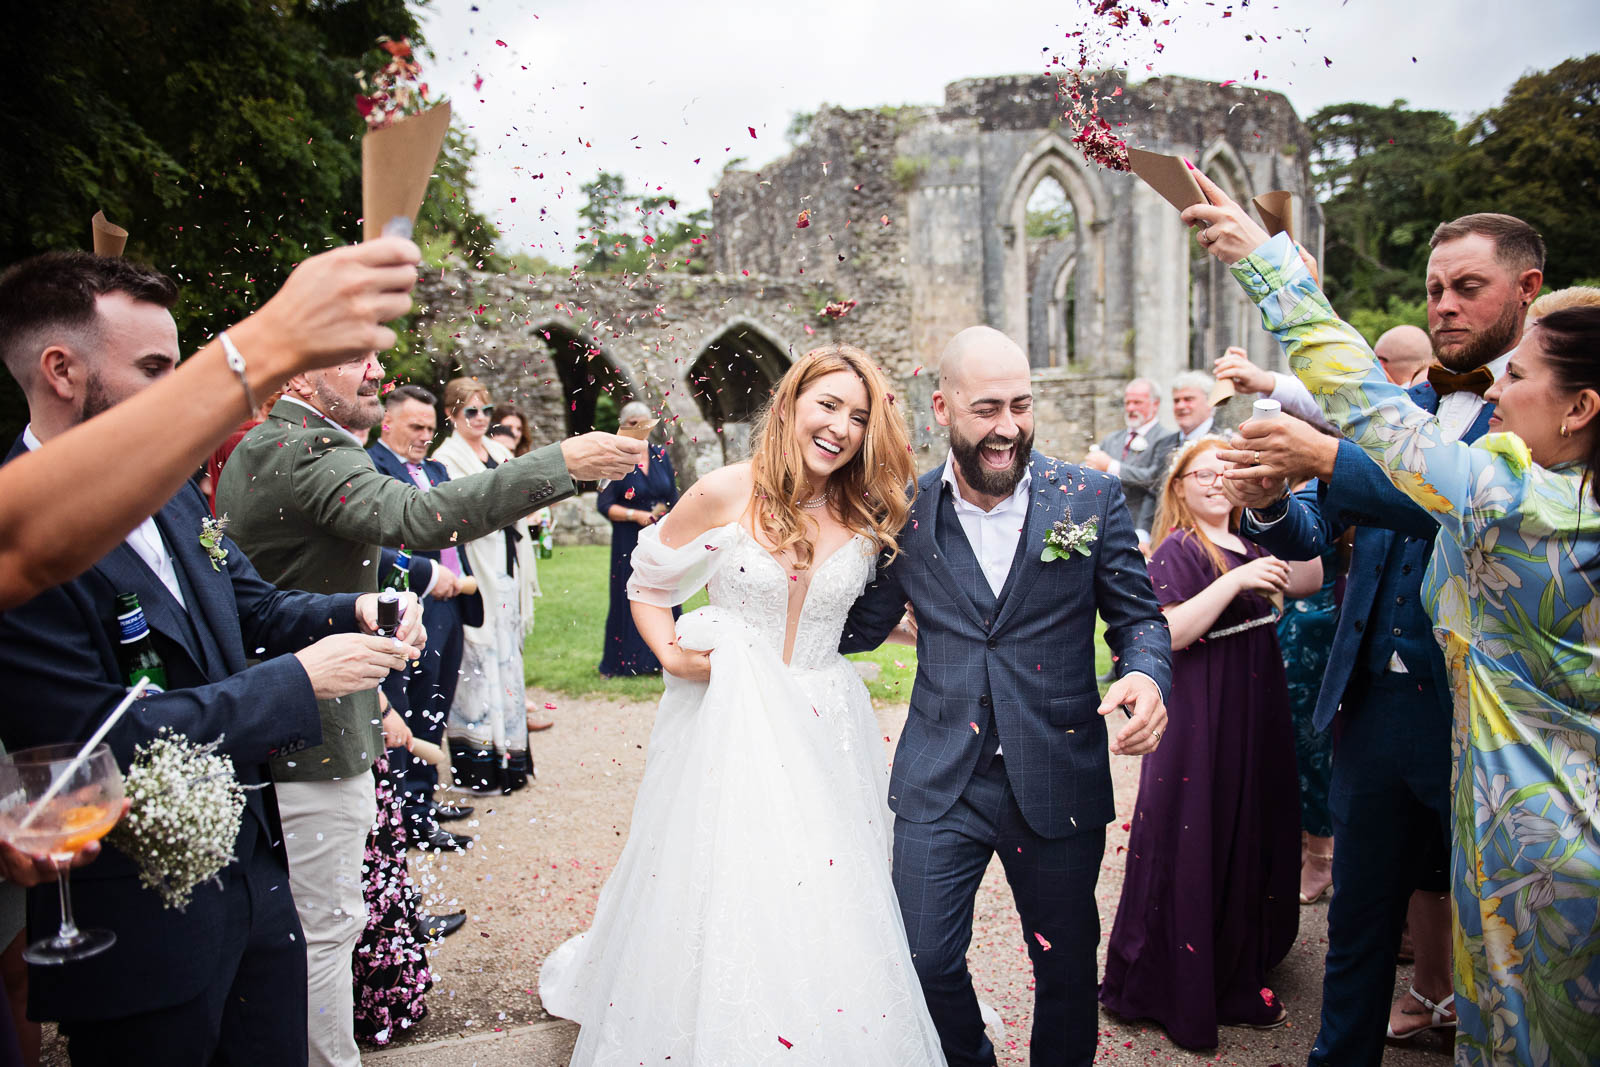 Bride and groom walking through a people archway with their wedding guests throwing confetti at them.